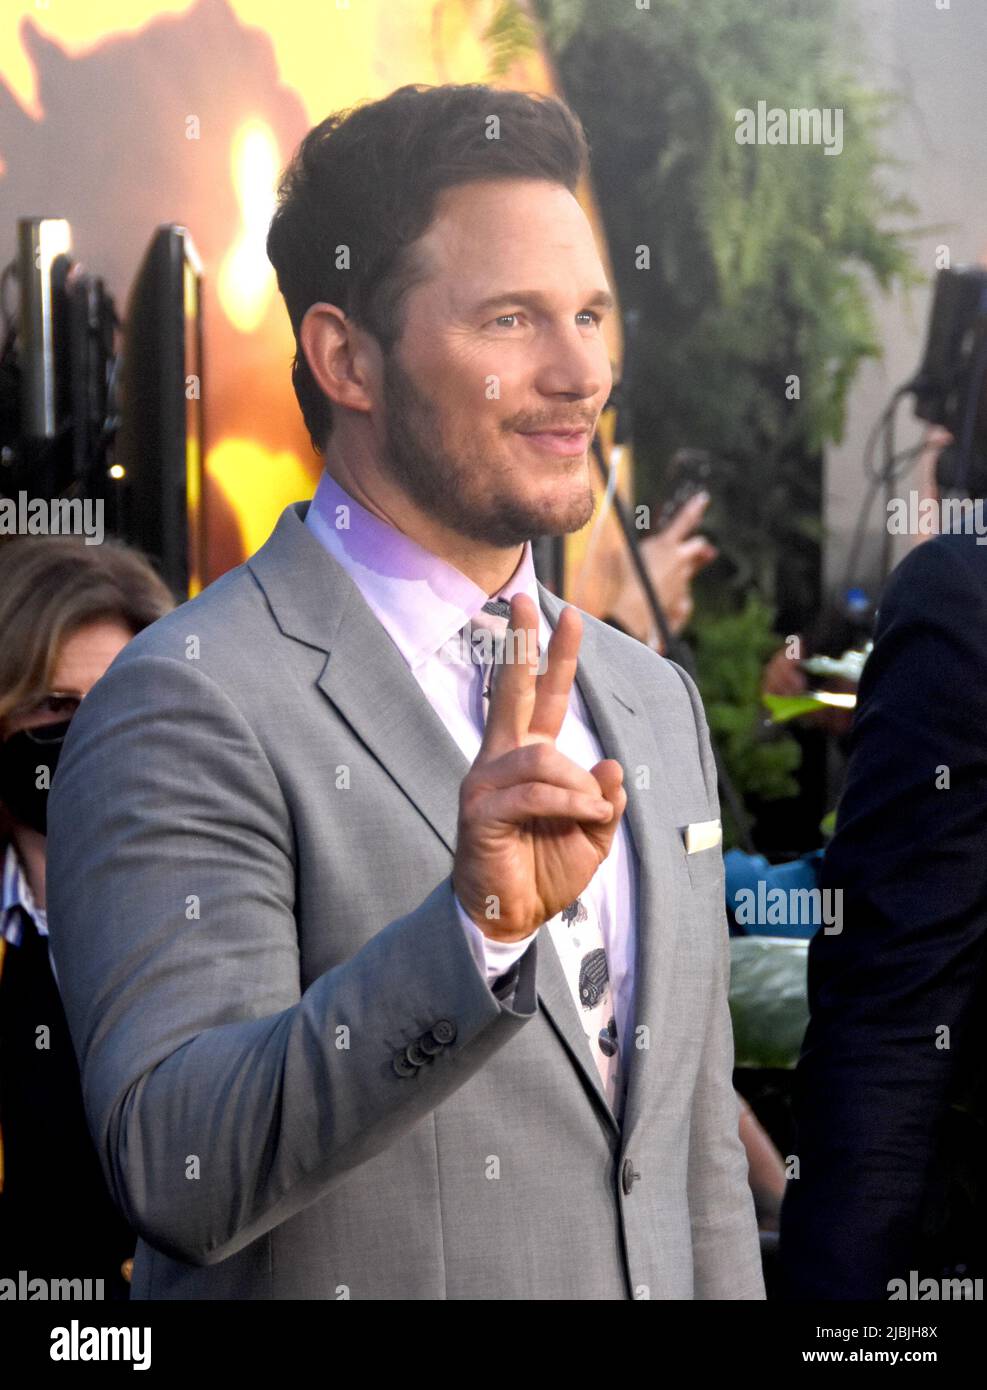 Hollywood, California, USA 6th June 2022 Actor Chris Pratt attends Universal Pictures Presents The World Premiere of 'Jurassic World Dominion' at TCL Chinese Theatre on June 6, 2022 in Hollywood, California, USA. Photo by Barry King/Alamy Live News Stock Photo